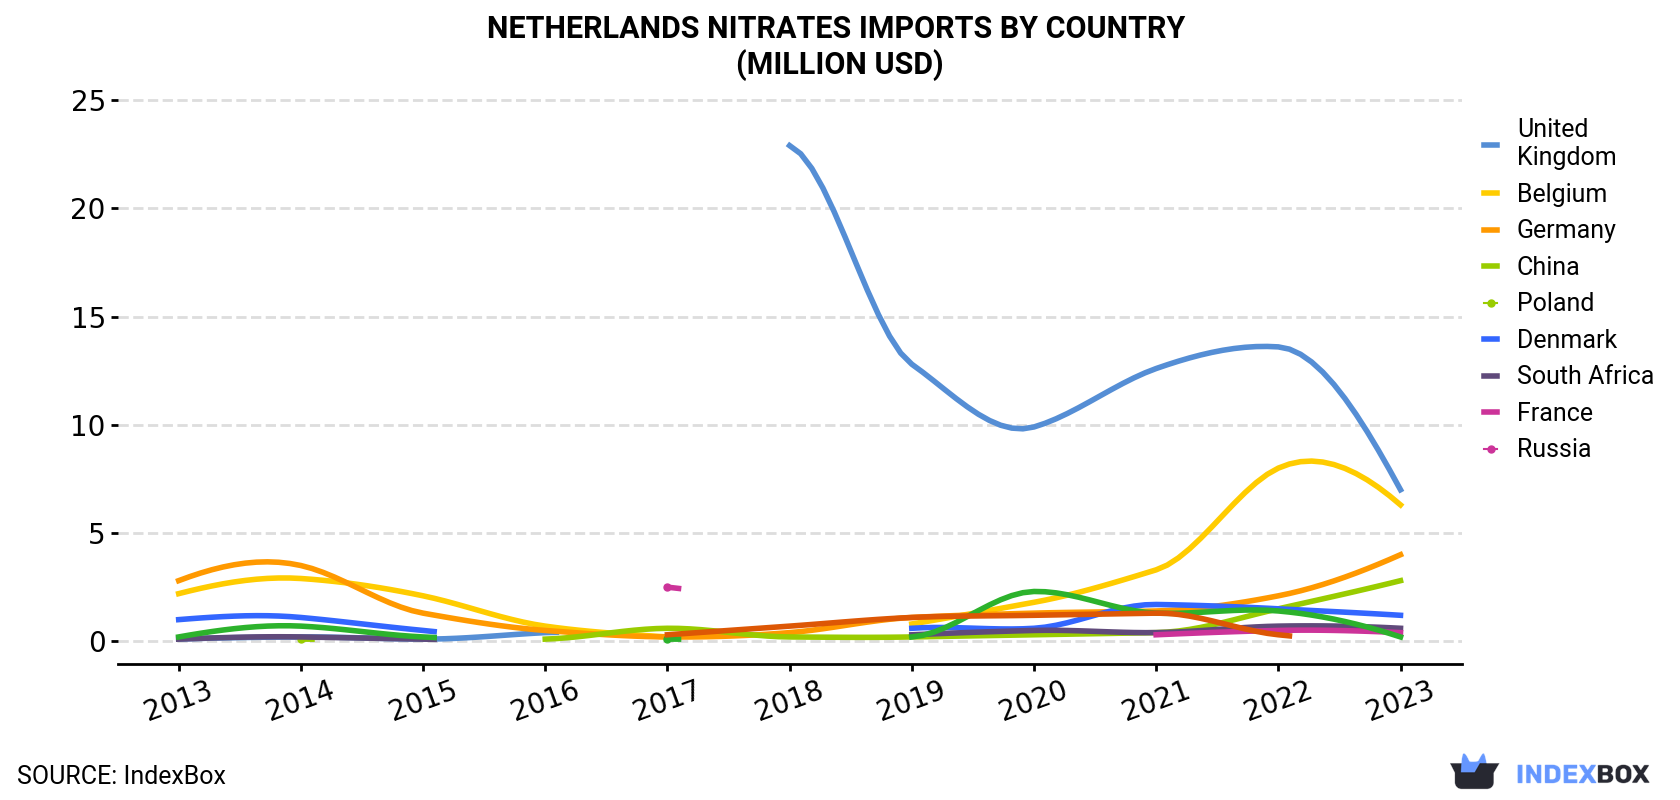 Netherlands Nitrates Imports By Country (Million USD)